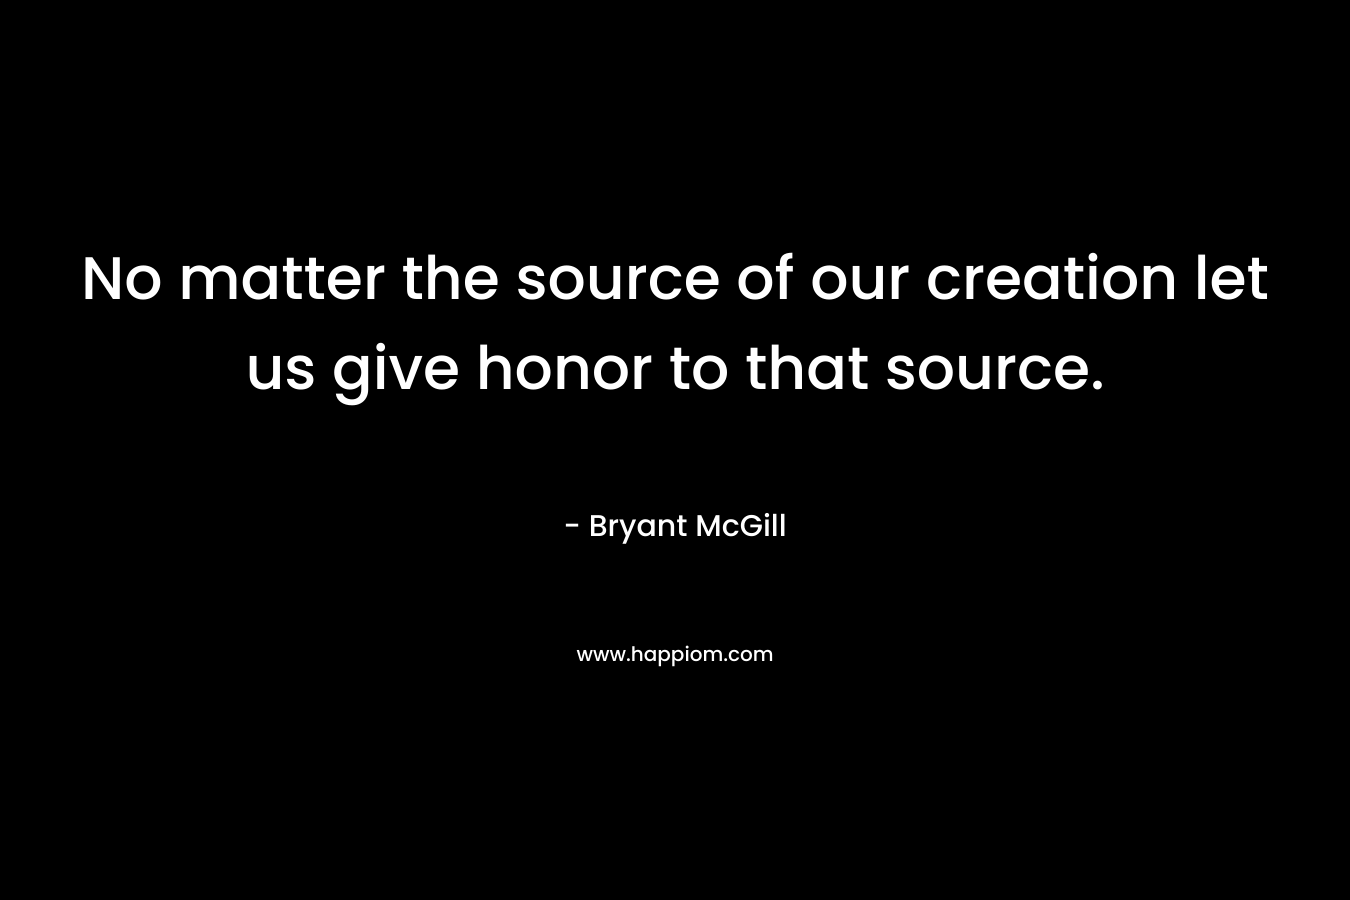 No matter the source of our creation let us give honor to that source.